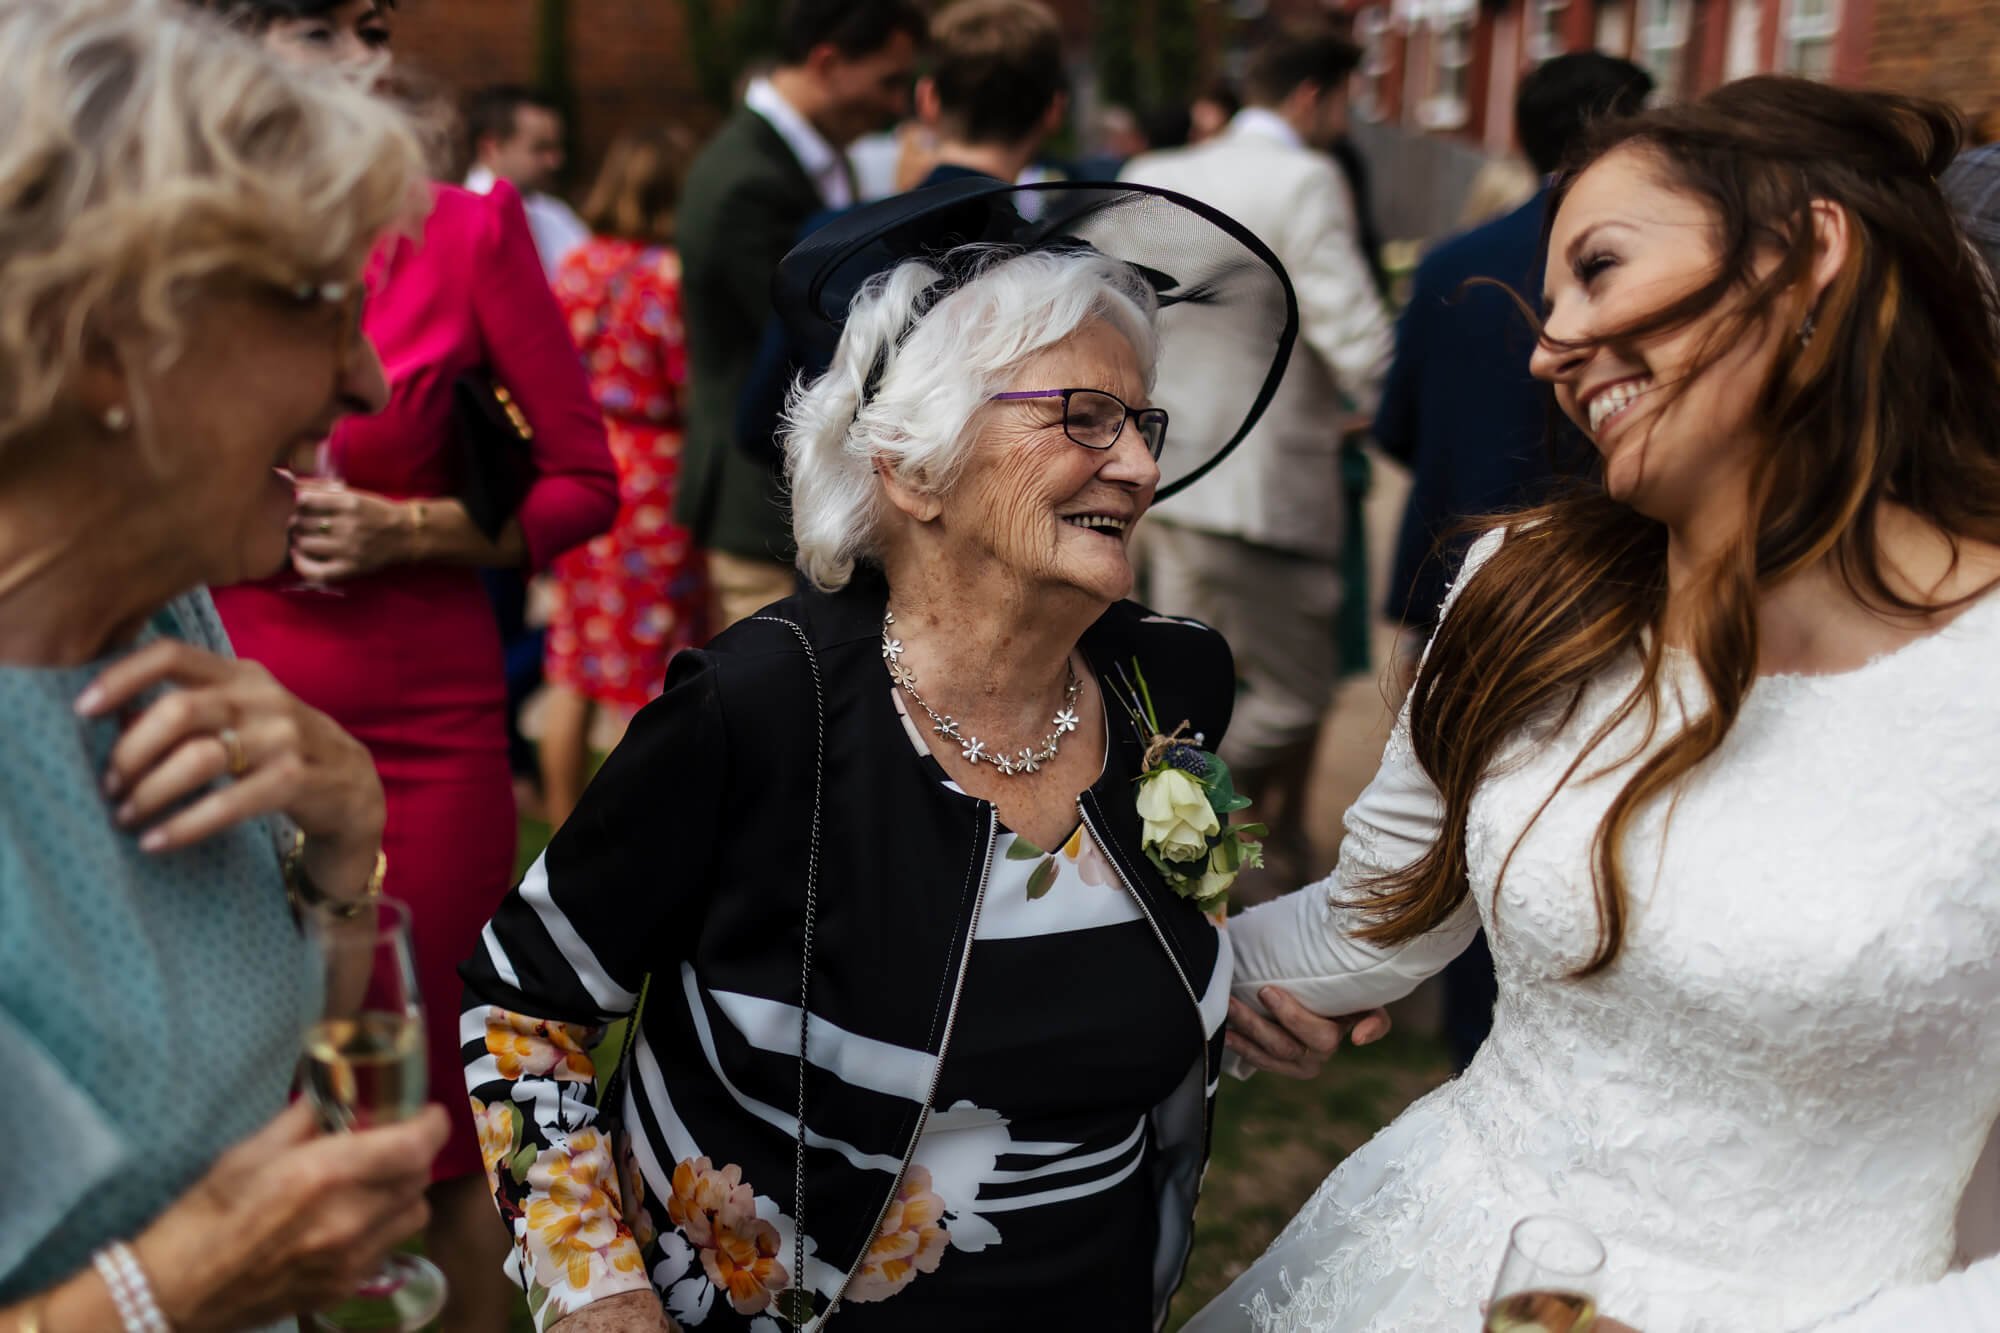 Bride and grandmother at her wedding